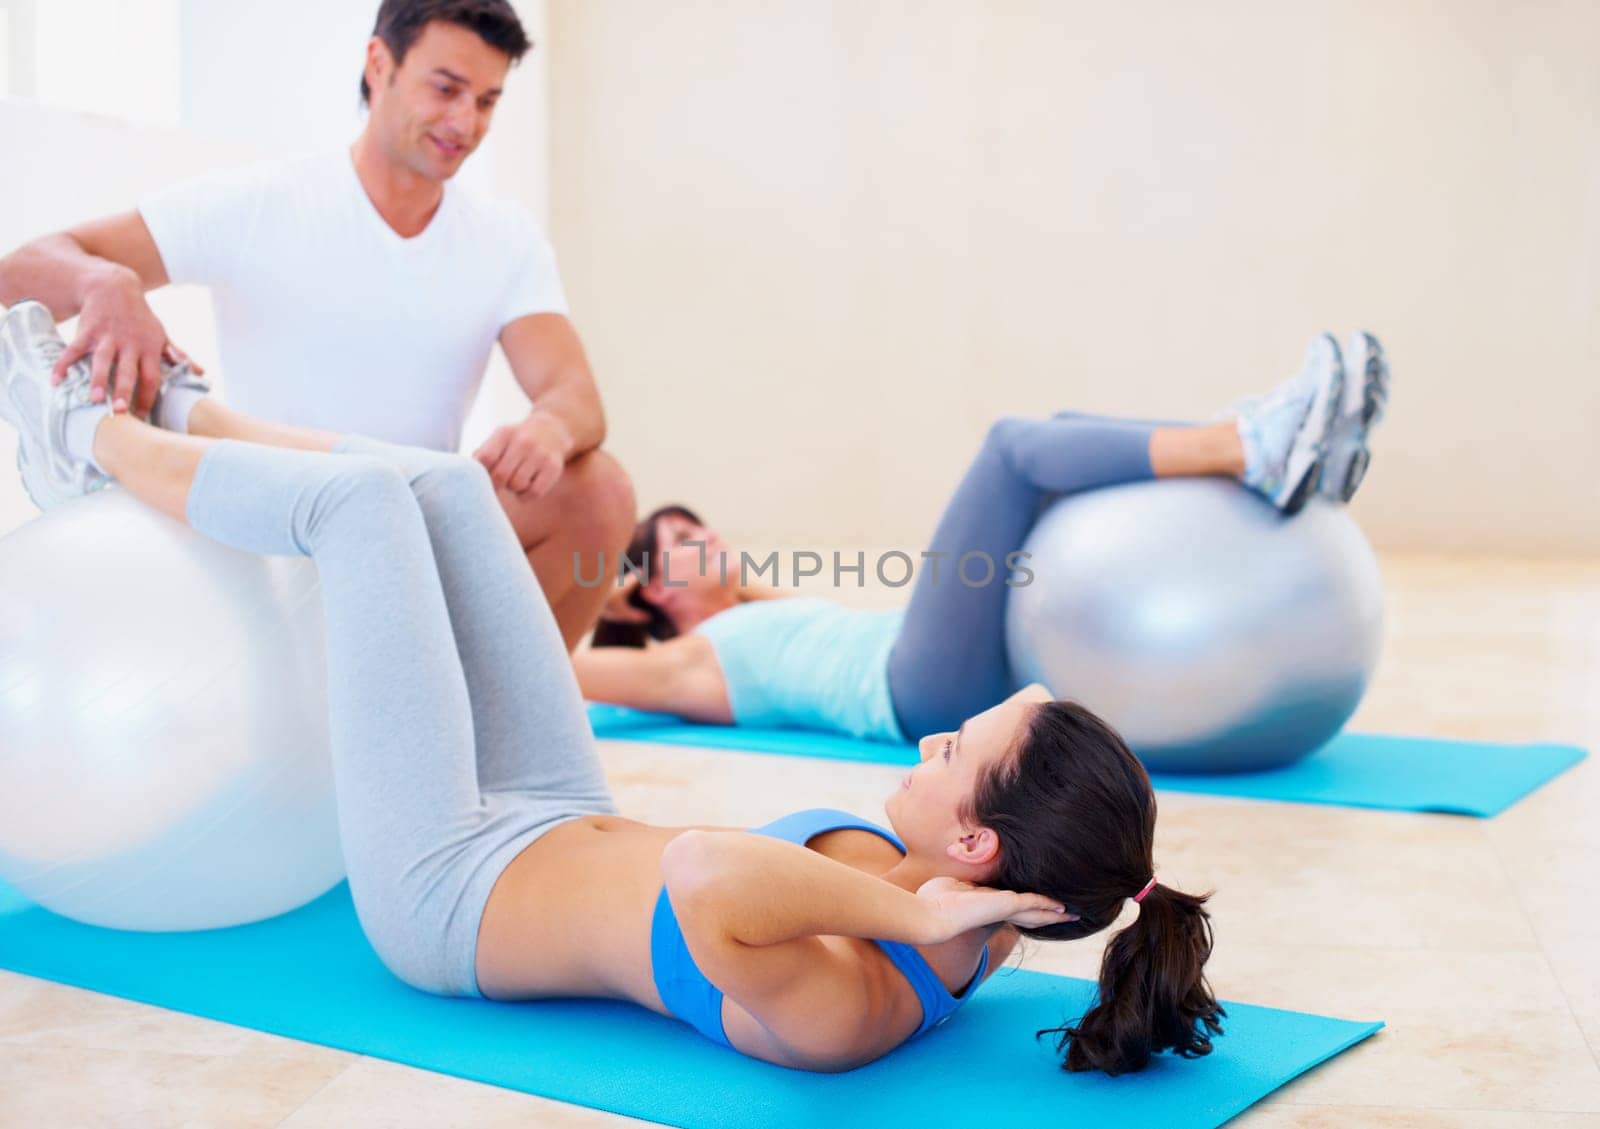 Personal trainer, pilates and help woman with ball, balance and posture with training advice, fitness and gym. Man, exercise and helping women in class with stretching, wellness or workout on floor.